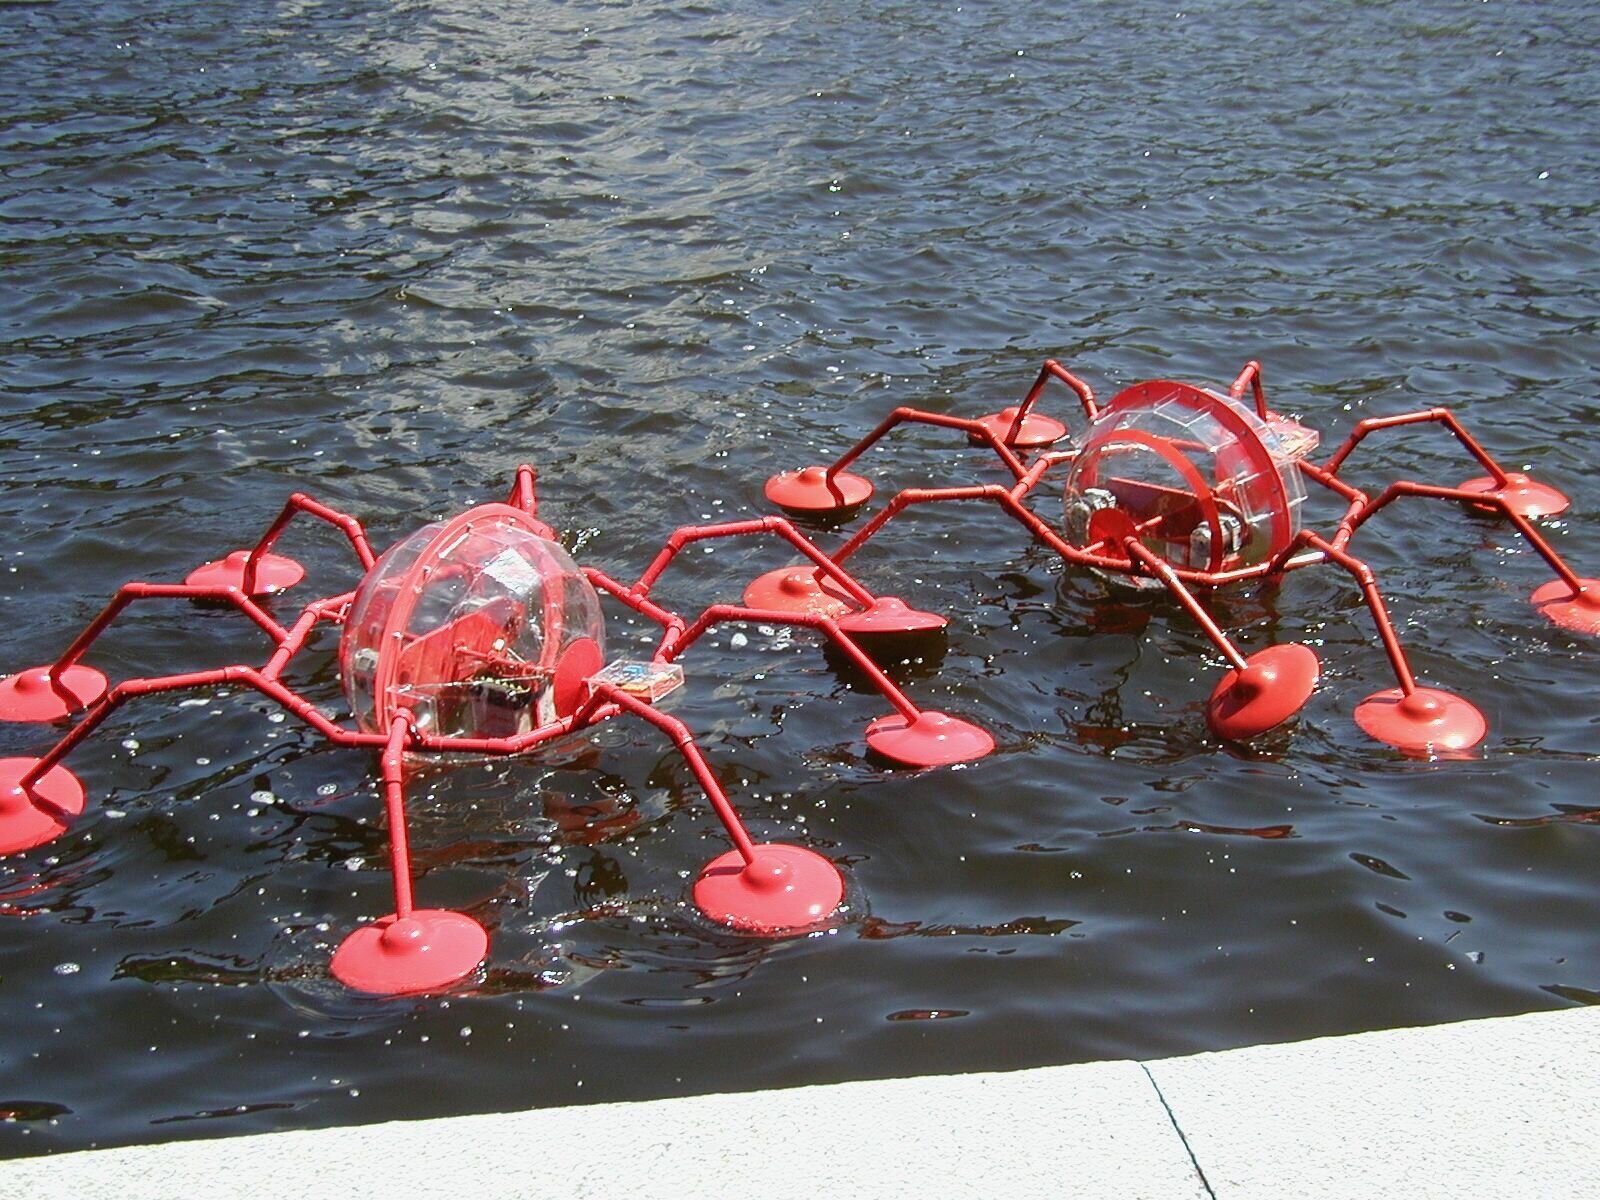 Dance of the Water Spiders